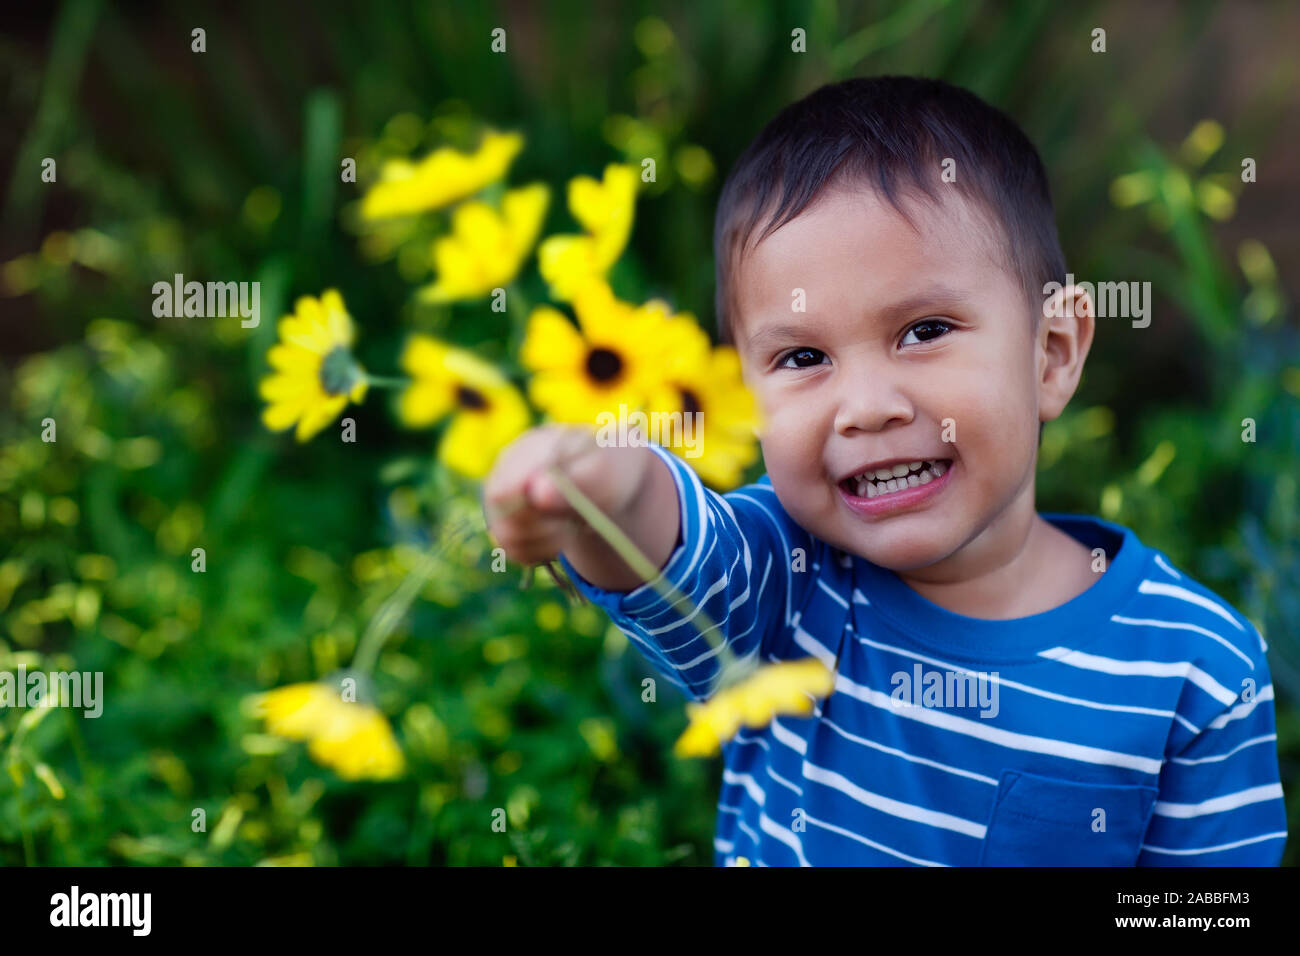 Smiling young son giving an arrangement of yellow flowers he is holding to show affection and love. Stock Photo